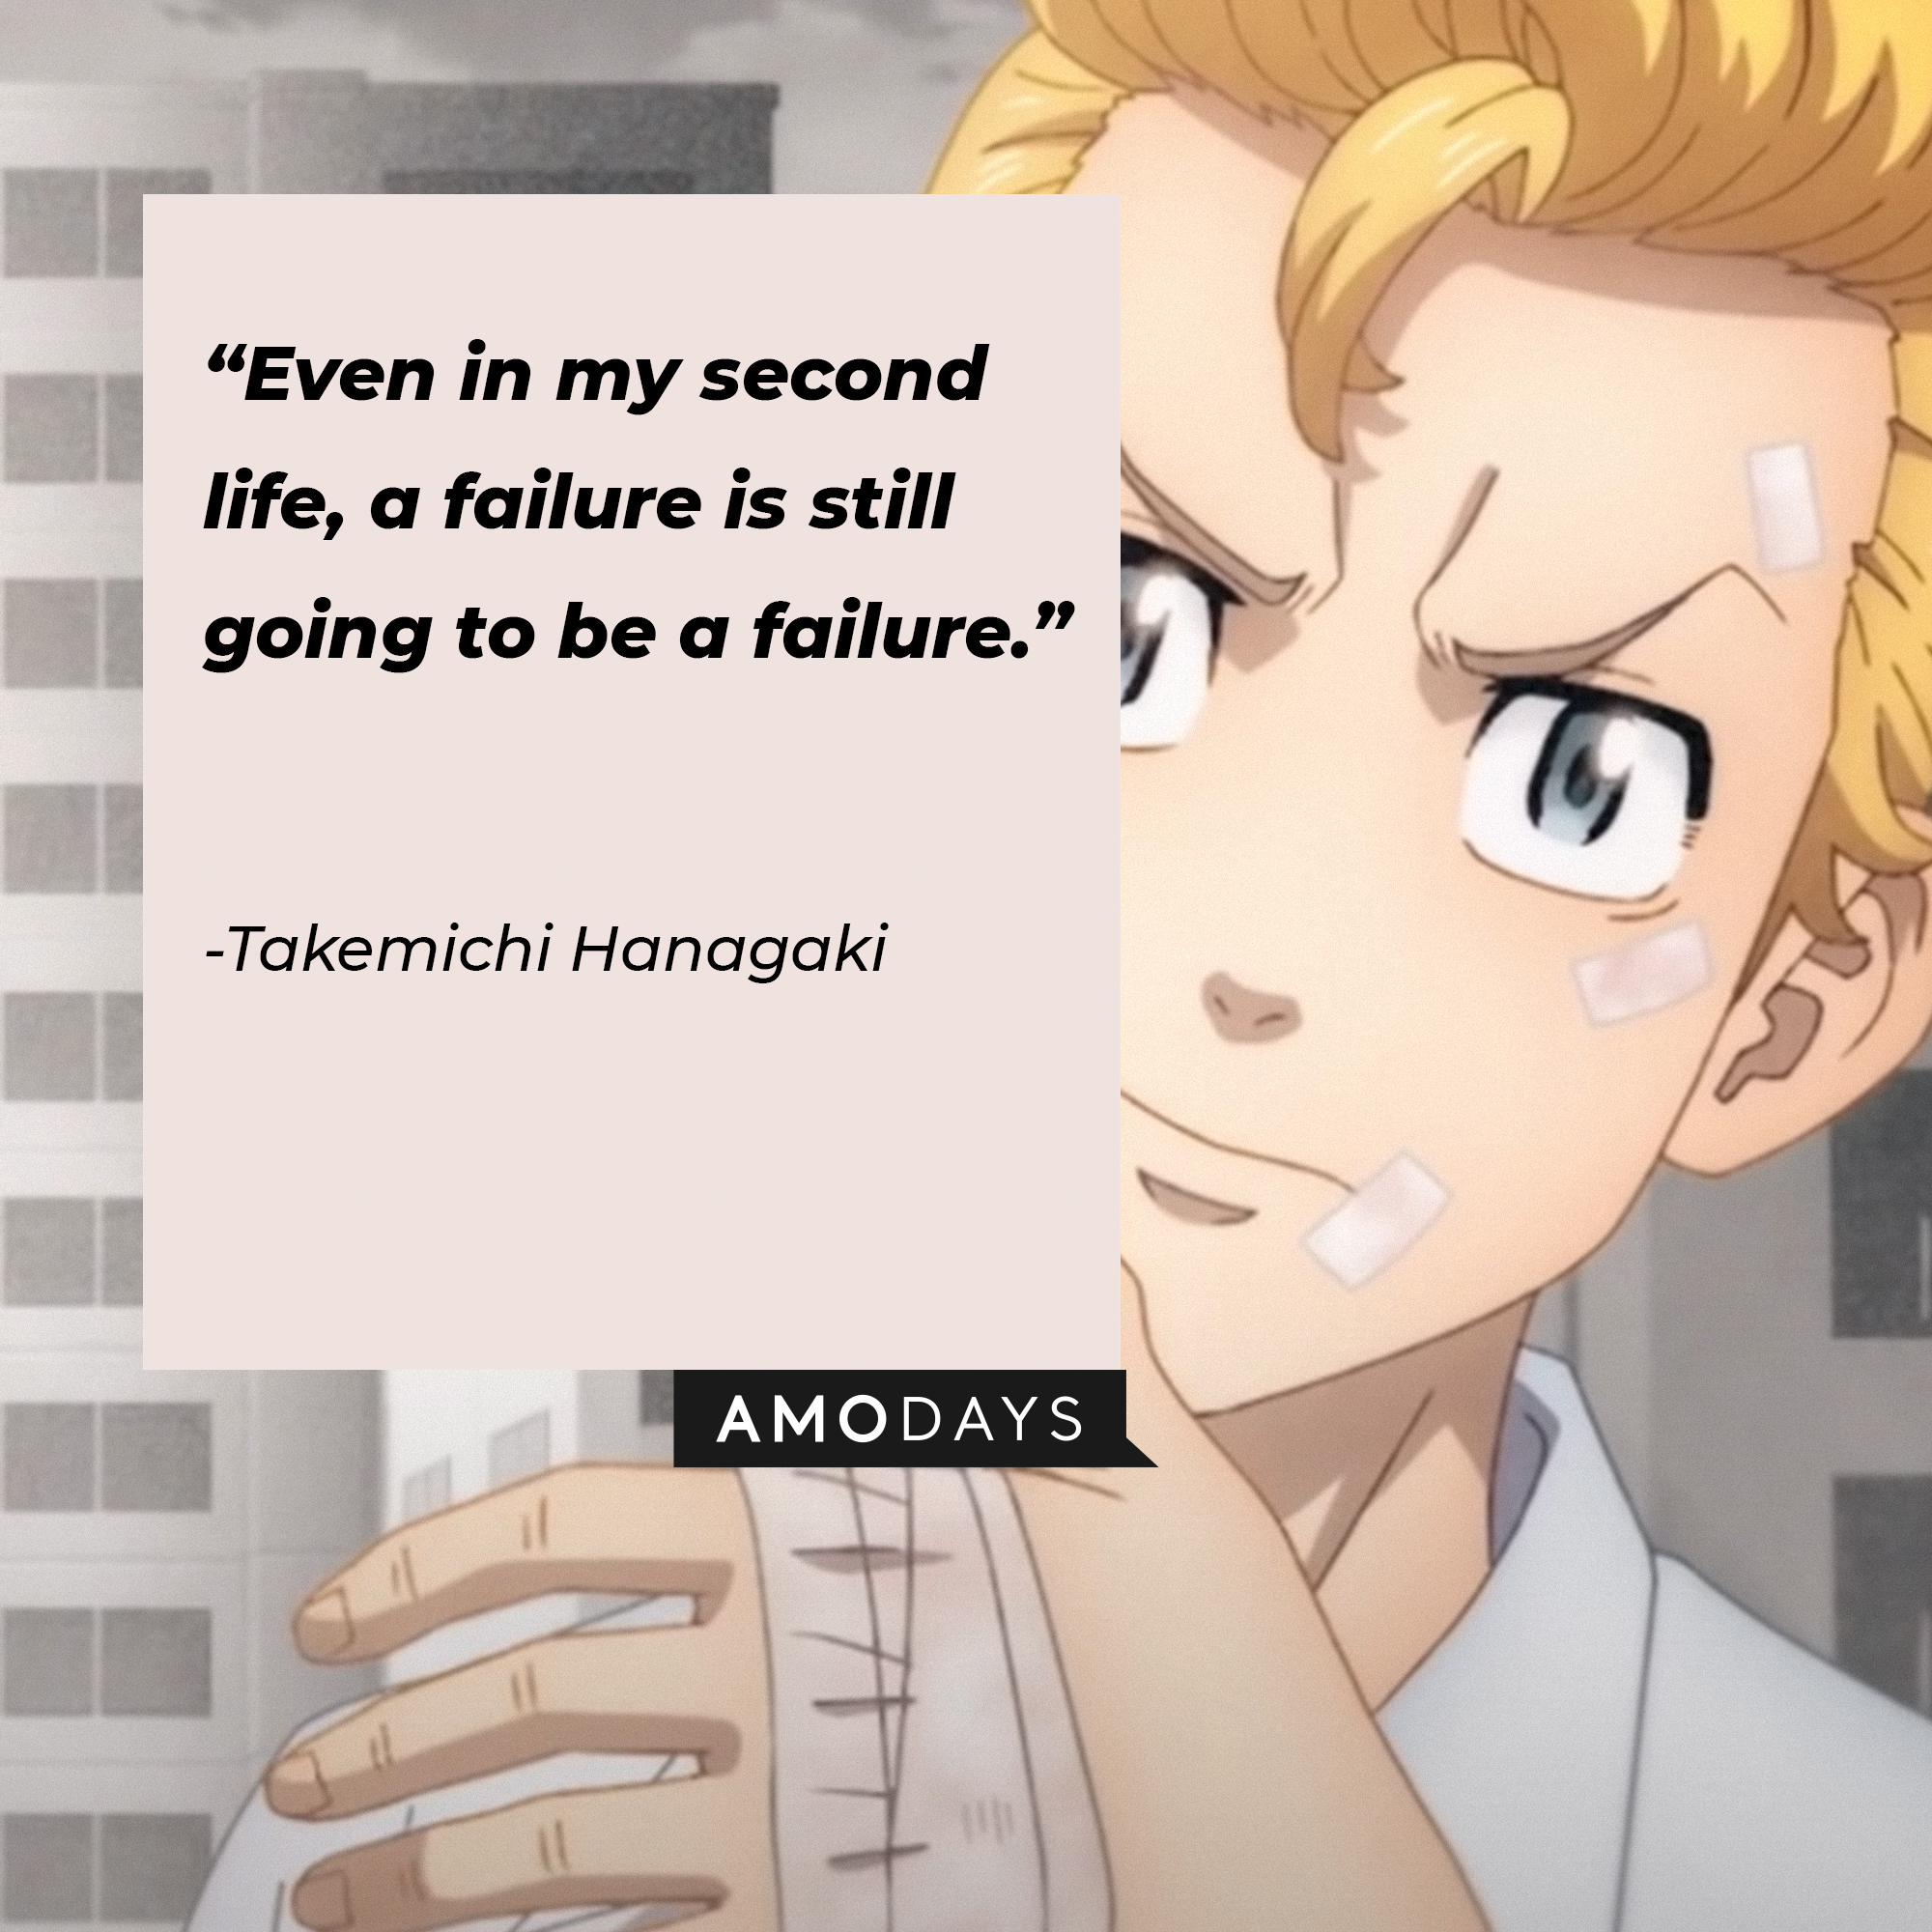 Takemichi Hanagaki's quote: "Even in my second life, a failure is still going to be a failure." | Source: Youtube.com/Crunchyroll Collection